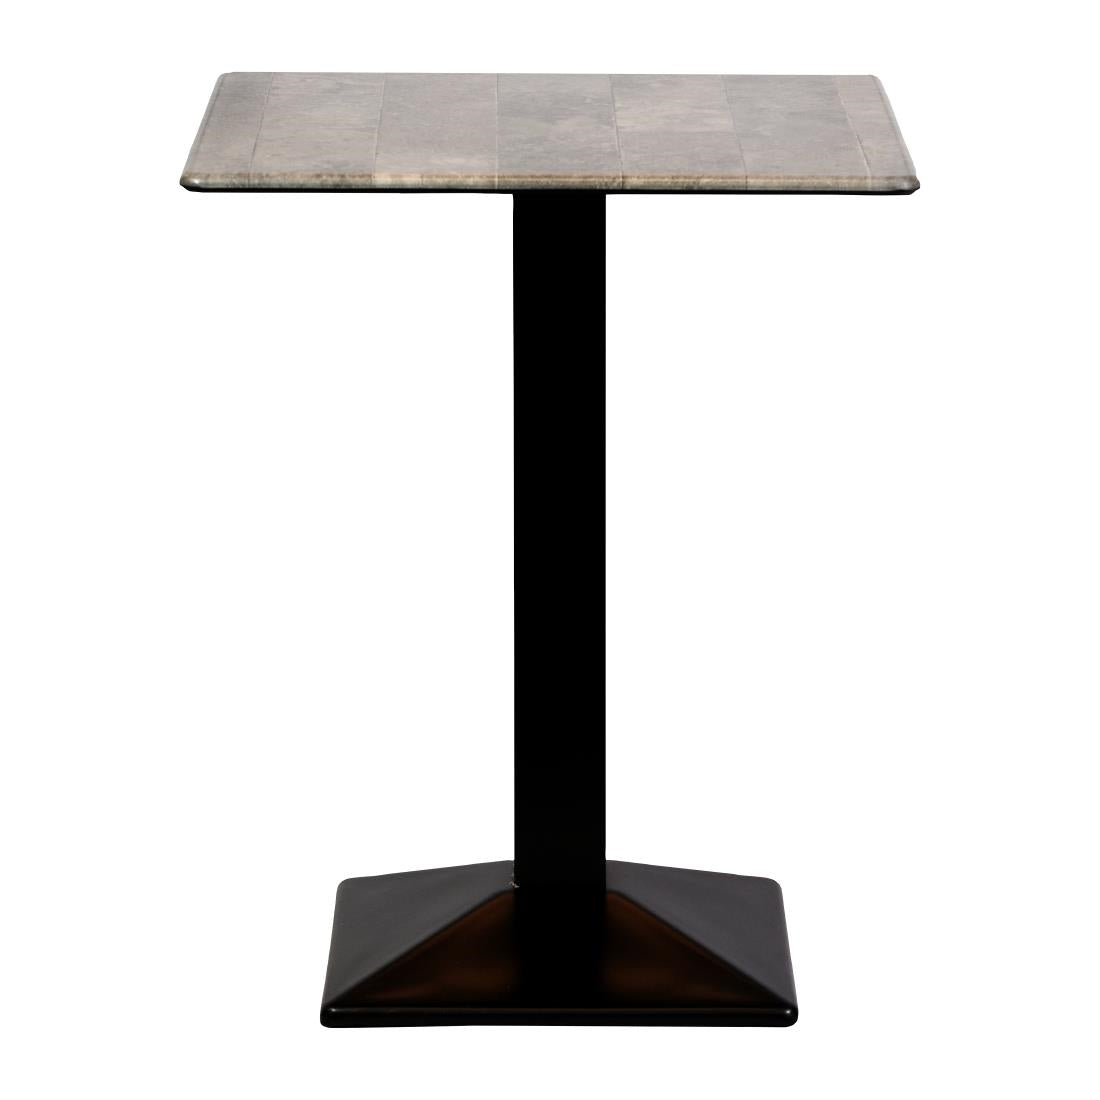 CZ827 Turin Metal Base Square Poseur Table with Laminate Top Concrete 600mm JD Catering Equipment Solutions Ltd